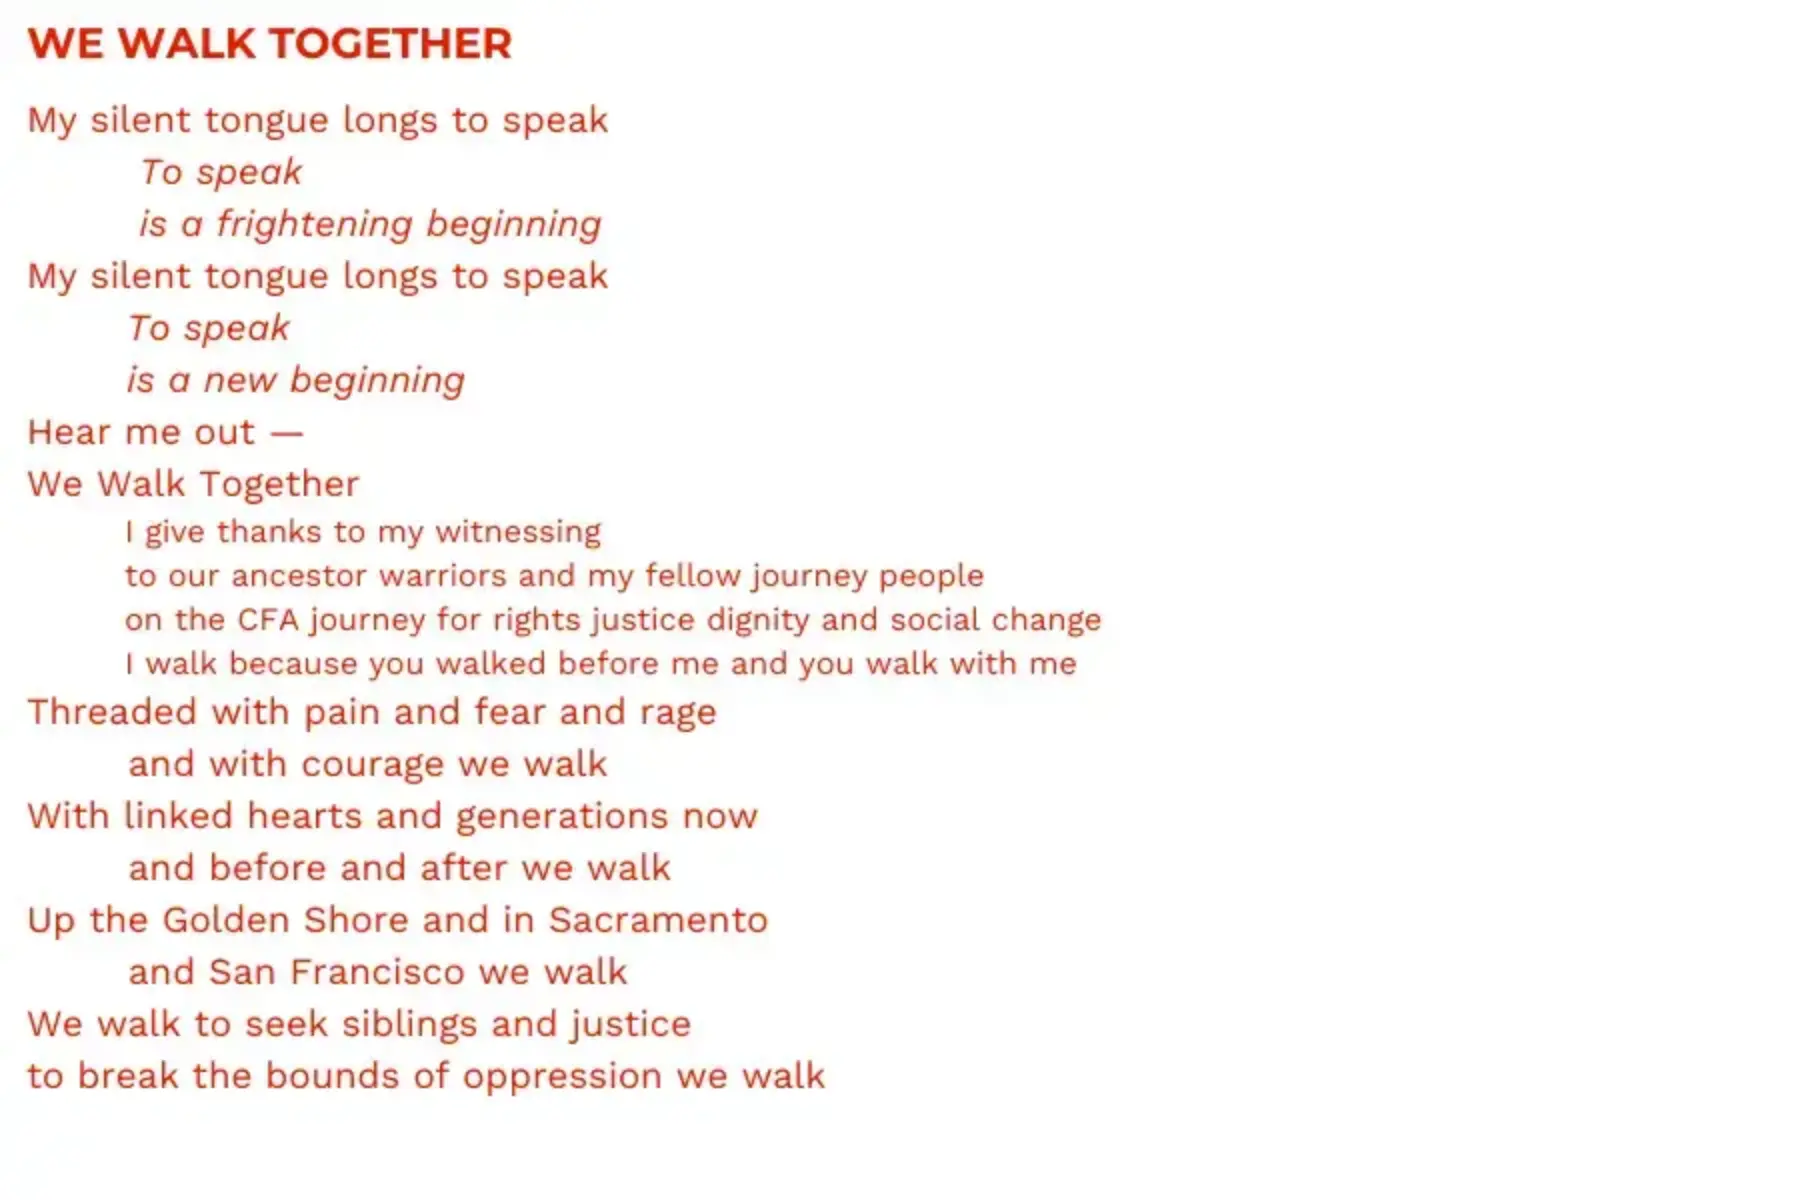 White background with red text that reads: WE WALK TOGETHER My silent tongue longs to speak To speak is a frightening beginning My silent tongue longs to speak To speak is a new beginning Hear me out — We Walk Together I give thanks to my witnessing to our ancestor warriors and my fellow journey people on the CFA journey for rights justice dignity and social change I walk because you walked before me and you walk with me Threaded with pain and fear and rage and with courage we walk With linked hearts and generations now and before and after we walk Up the Golden Shore and in Sacramento and San Francisco we walk We walk to seek siblings and justice to break the bounds of oppression we walk